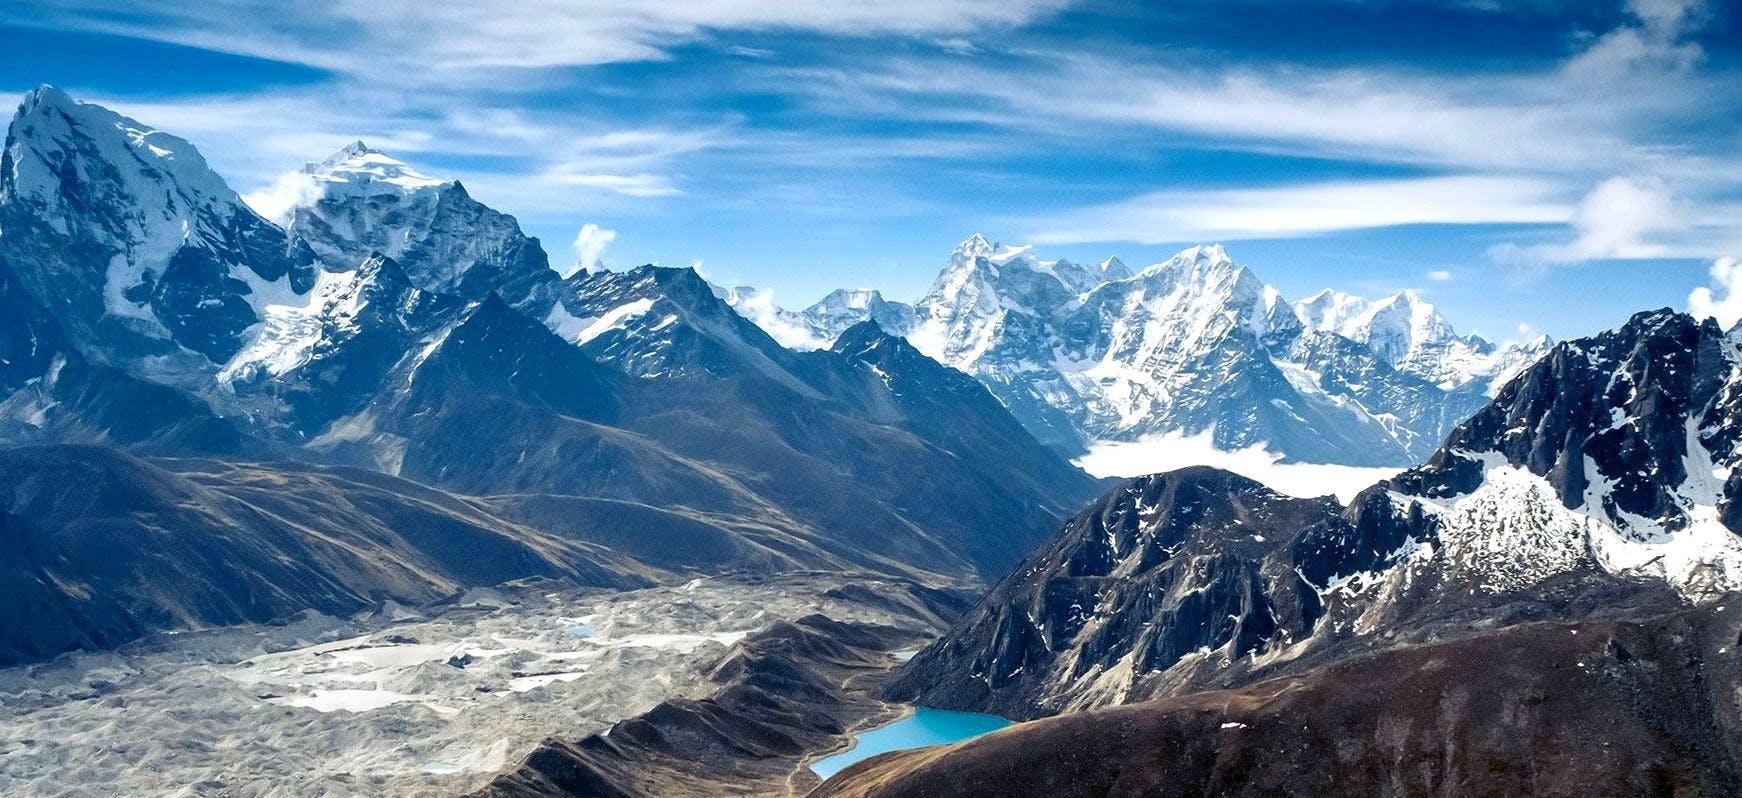 A Complete Guide for Helicopter Tours in Everest Region